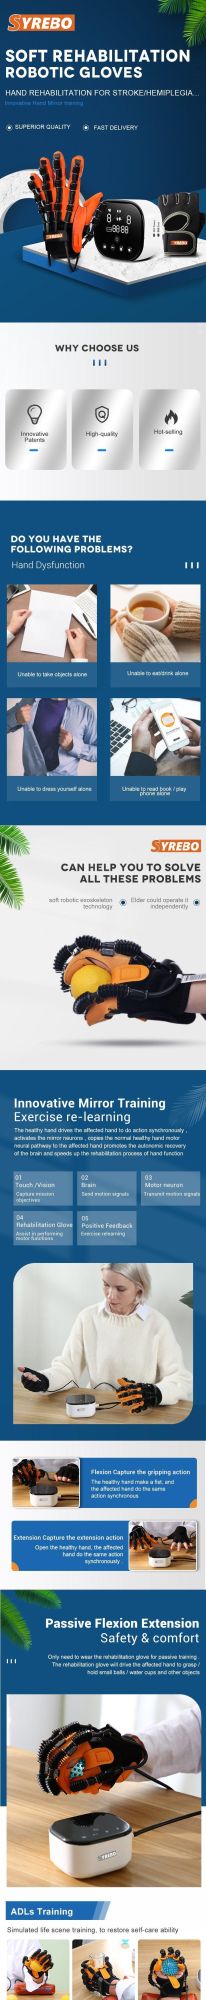 Emergency Medical Supplies & Training Physical Therapy Rehabilitation Equipment Hand Gloves Rehabilitation Device for Stroke